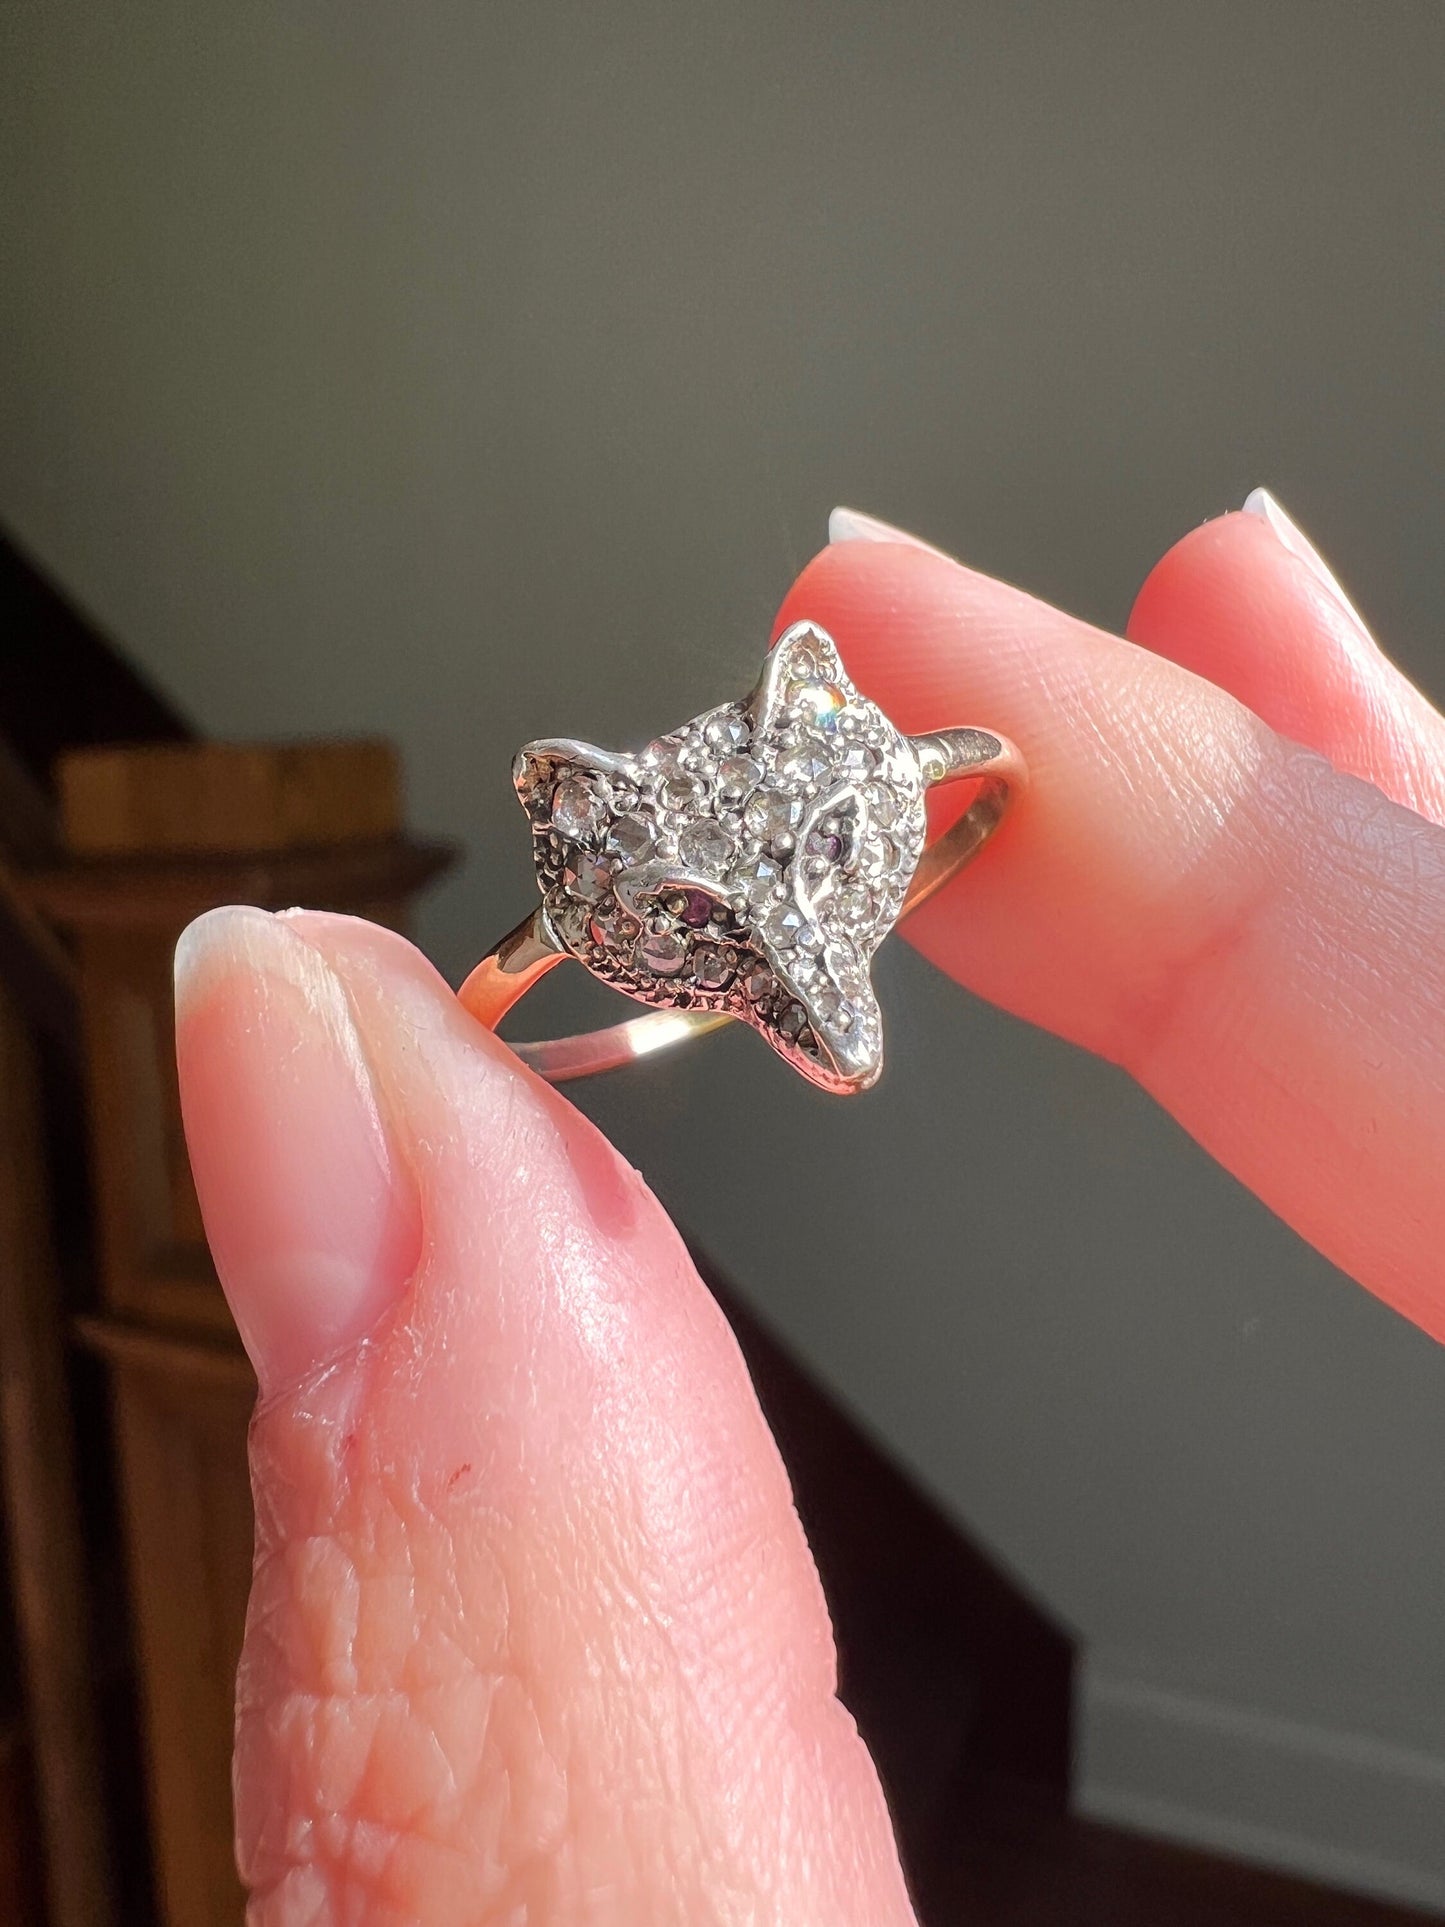 FOX Victorian ANTIQUE Rose Cut Diamonds RUBY Eyes All Original Figural Ring 15k Gold Silver Animal Jewelry Unique Gift Fun Stacker 1800s 14k